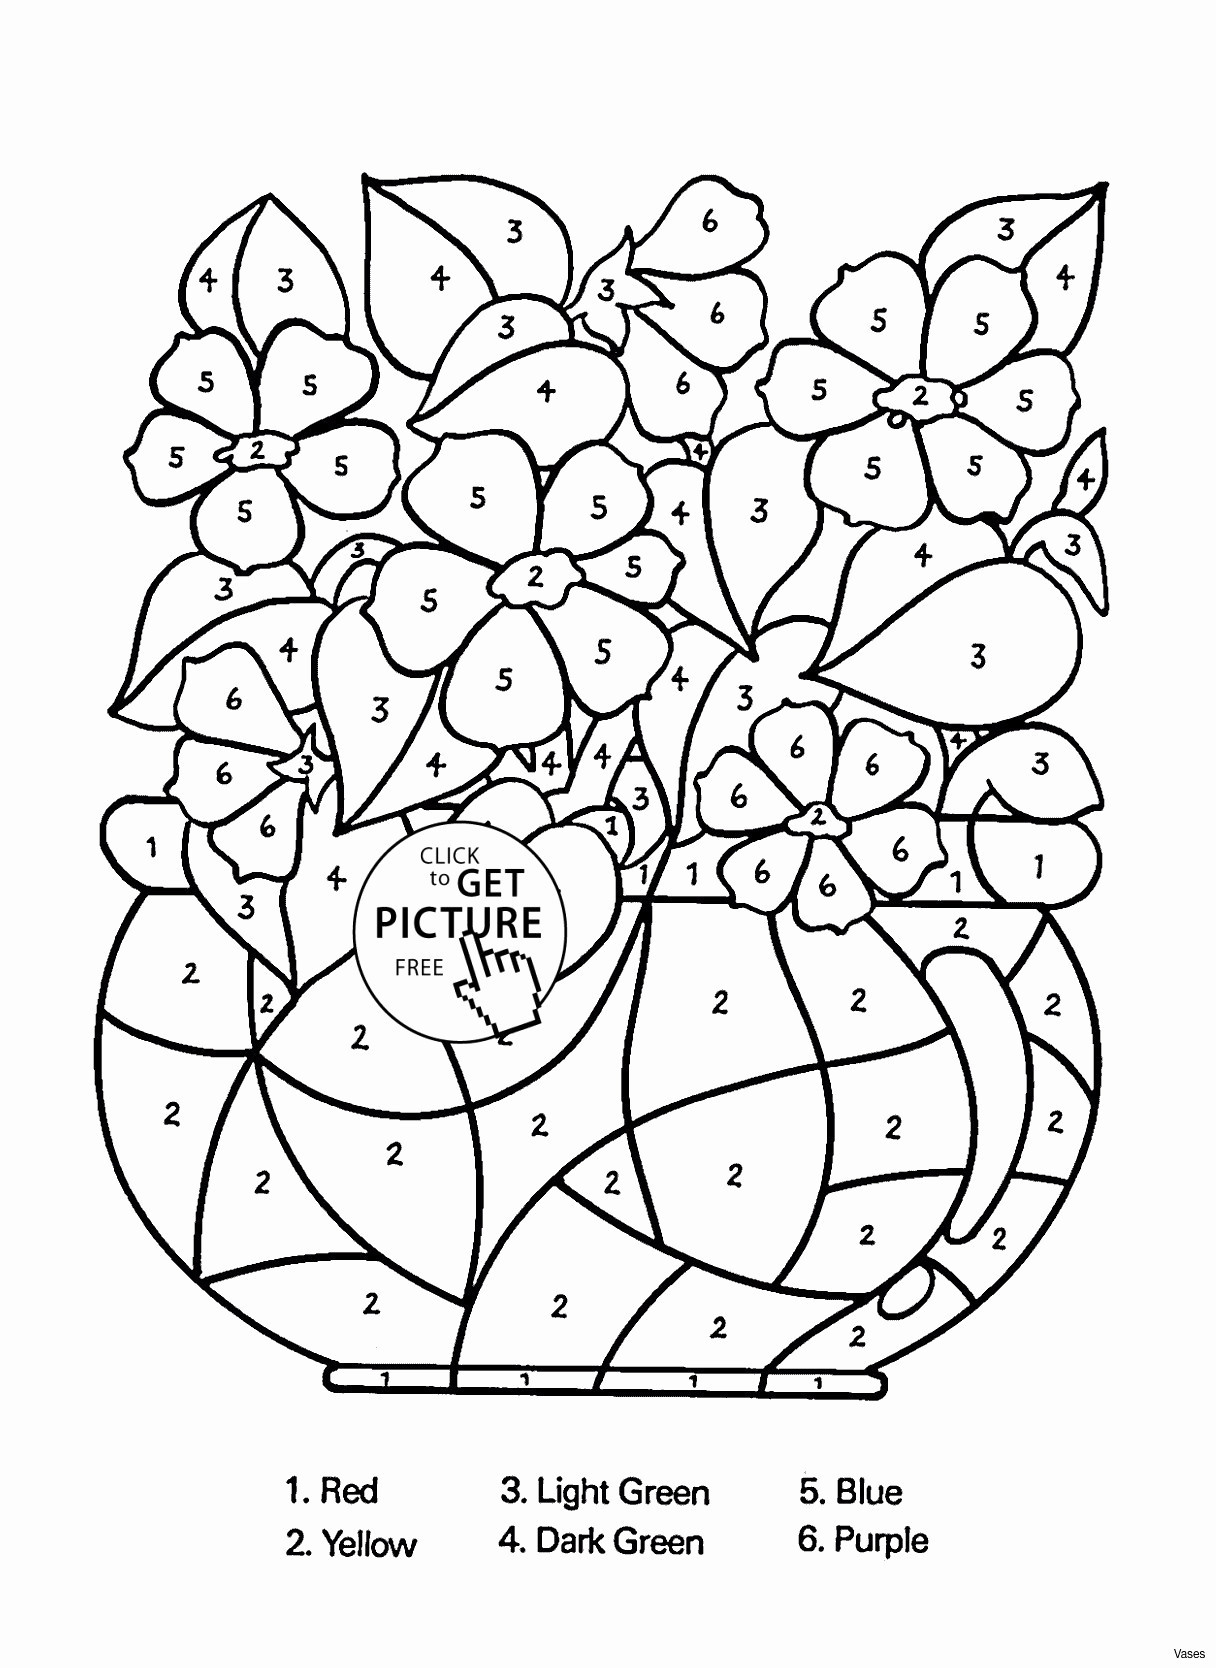 20 Lovely Cherry Blossom In Vase 2024 free download cherry blossom in vase of flowers to draw easy step by step 50 awesome collection sketch for inside flowers to draw easy step by step easy to draw rose elegant vases flower vase coloring